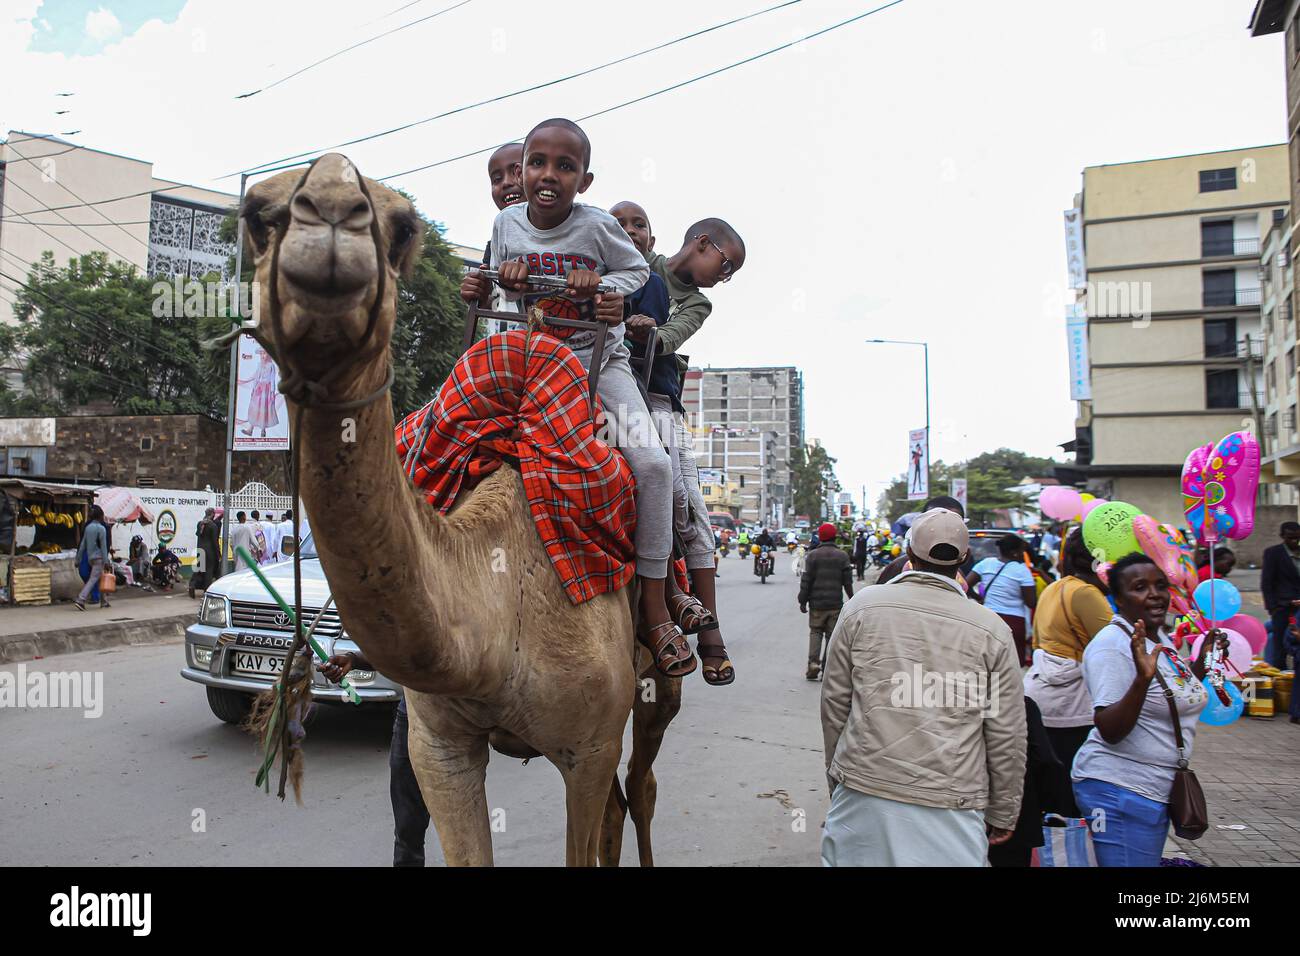 Kenyan Somali children enjoy a Carmel ride along Muratina road during Eid-Ul-Fitr celebrations in Eastleigh. Muslims in Kenya celebrate Eid-Ul-Fitr which marks the end of the Holy month of Ramadhan. Stock Photo